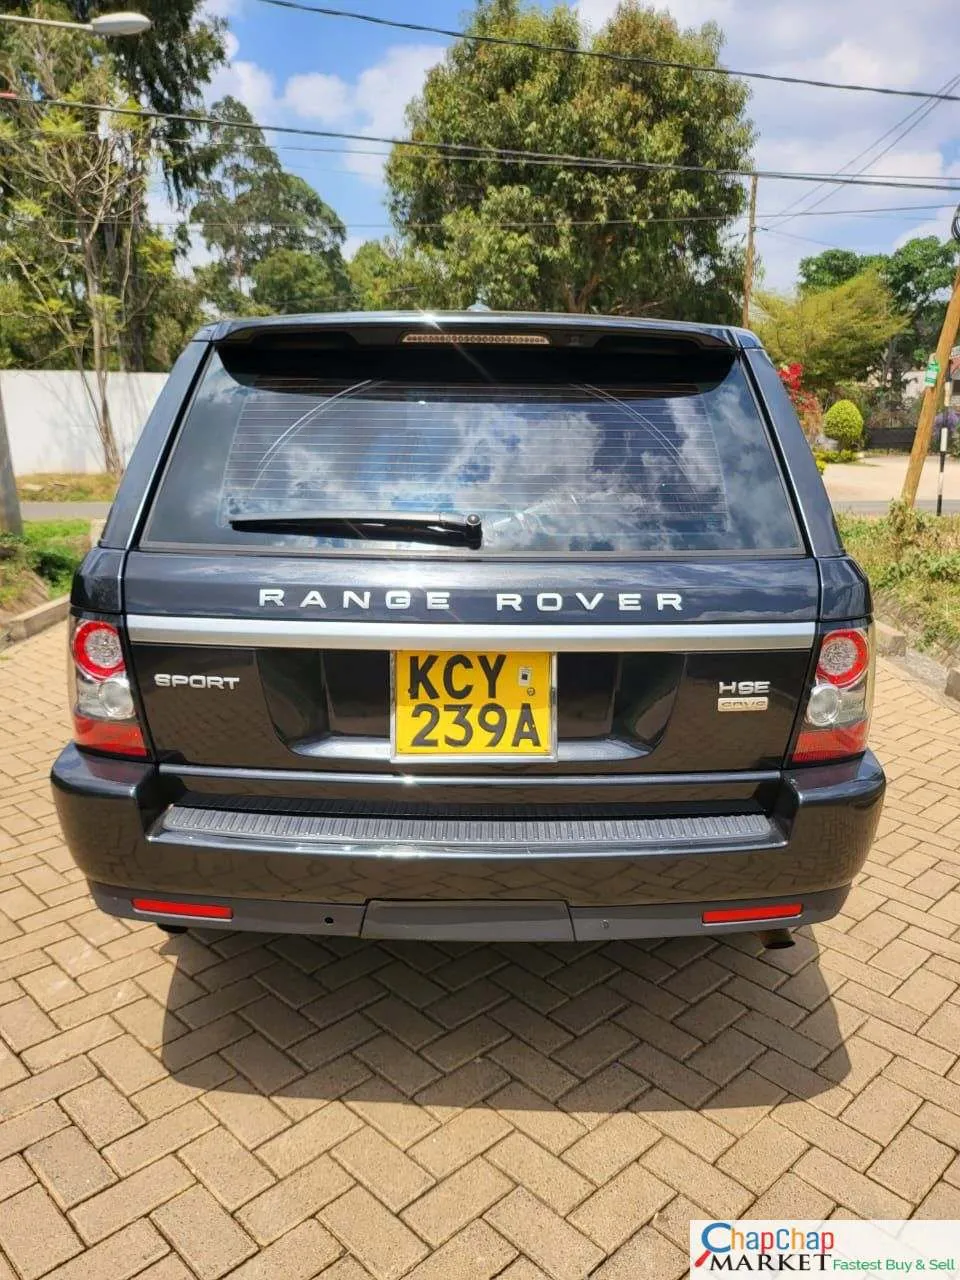 Range Rover Sport for sale in kenya hire purchase installments You pay 30% deposit Trade in OK EXCLUSIVE